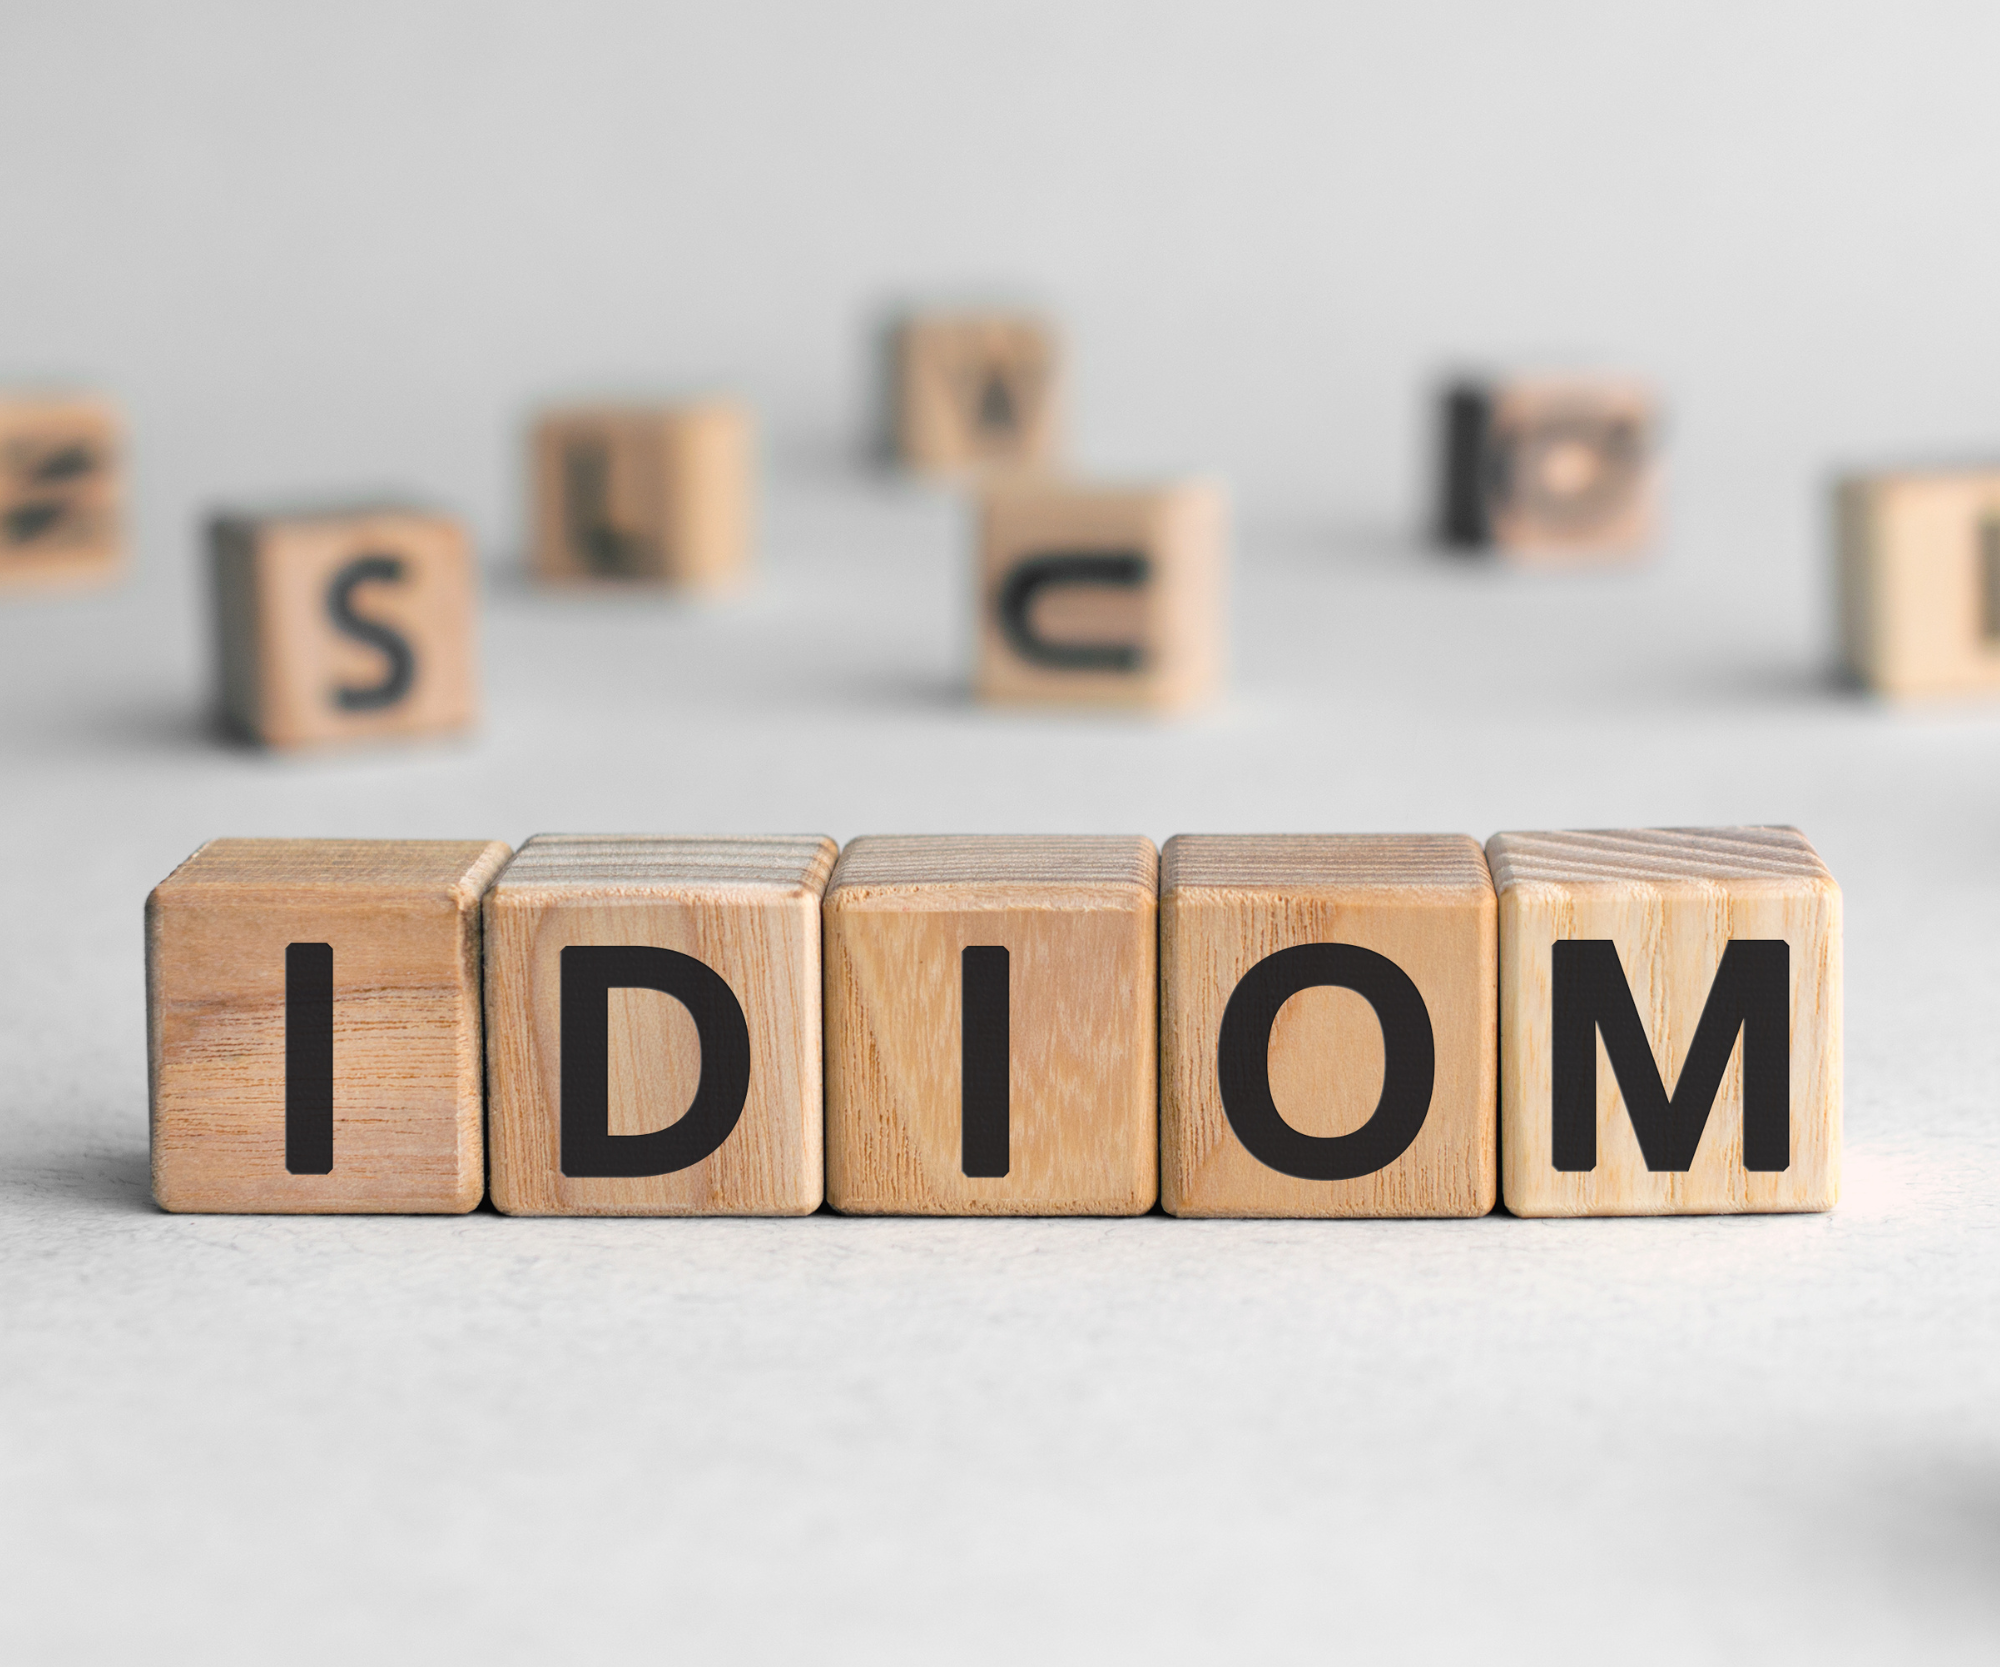 5 English Idioms, and What They Really Mean